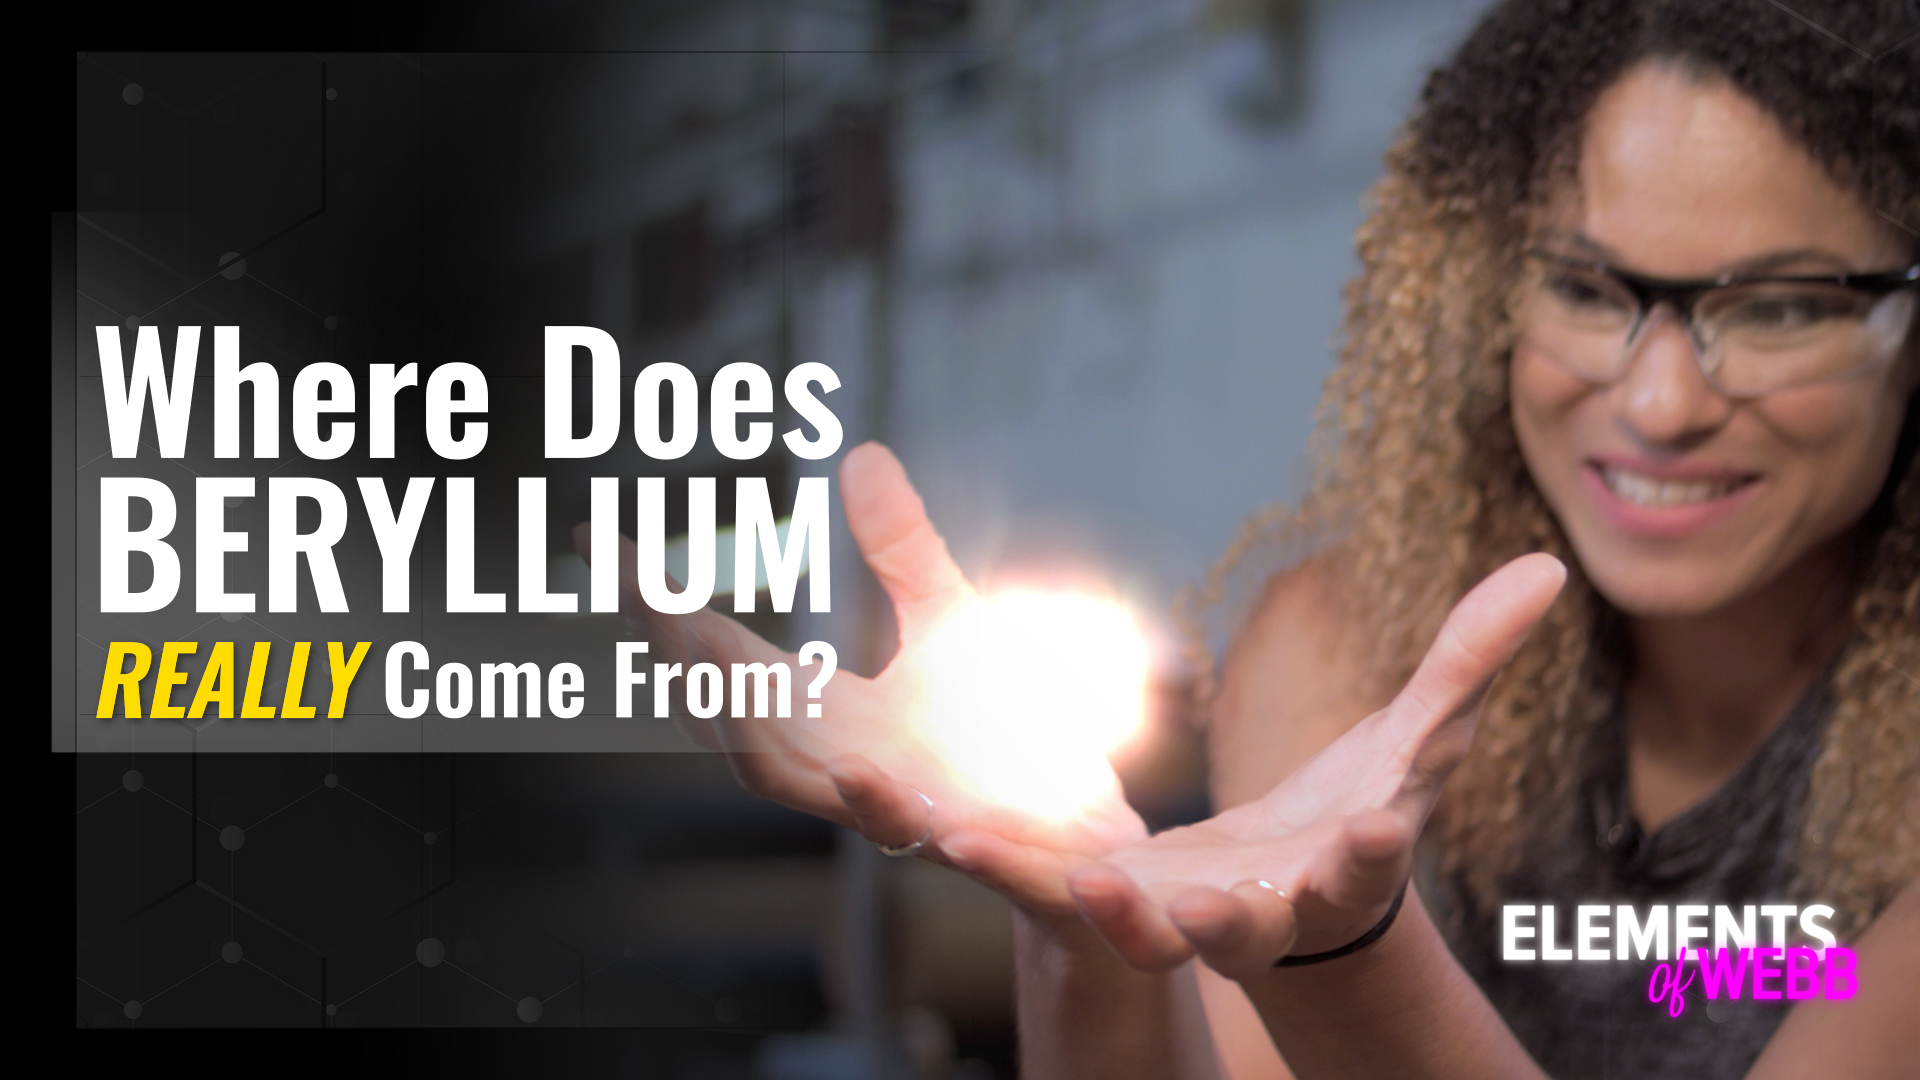 Elements of Webb EP 05:  Beryllium Part 3.  Where Does Beryllium Really Come From?